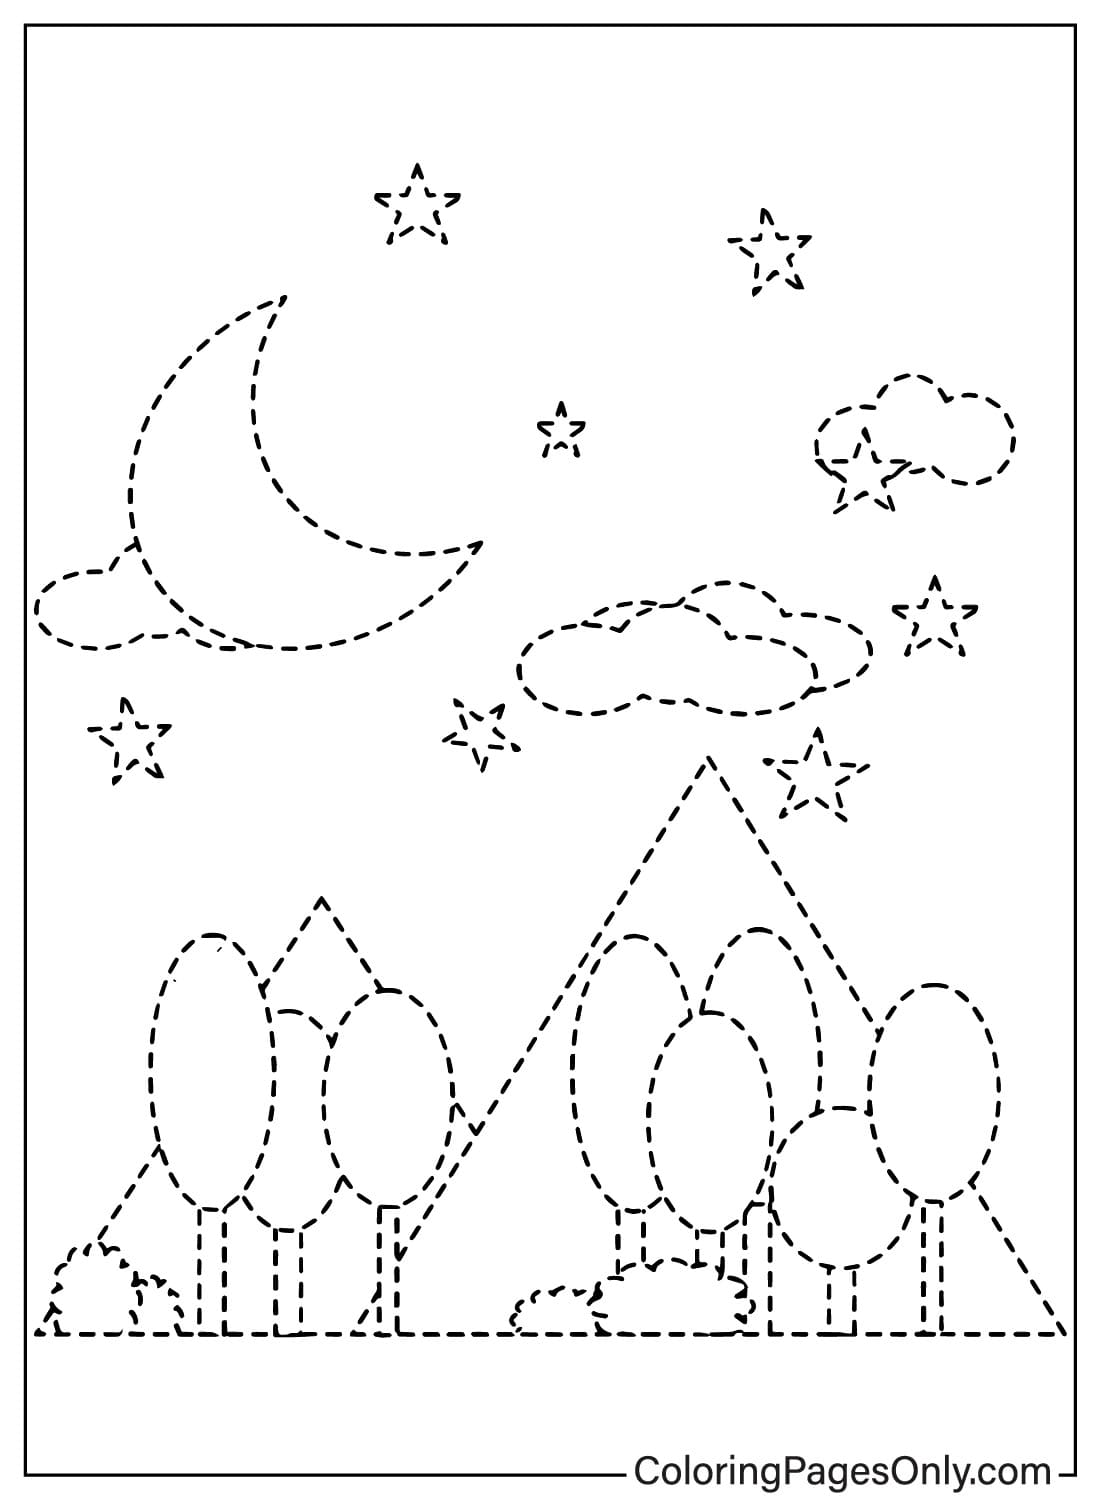 Tracing Coloring Page JPG from Tracing